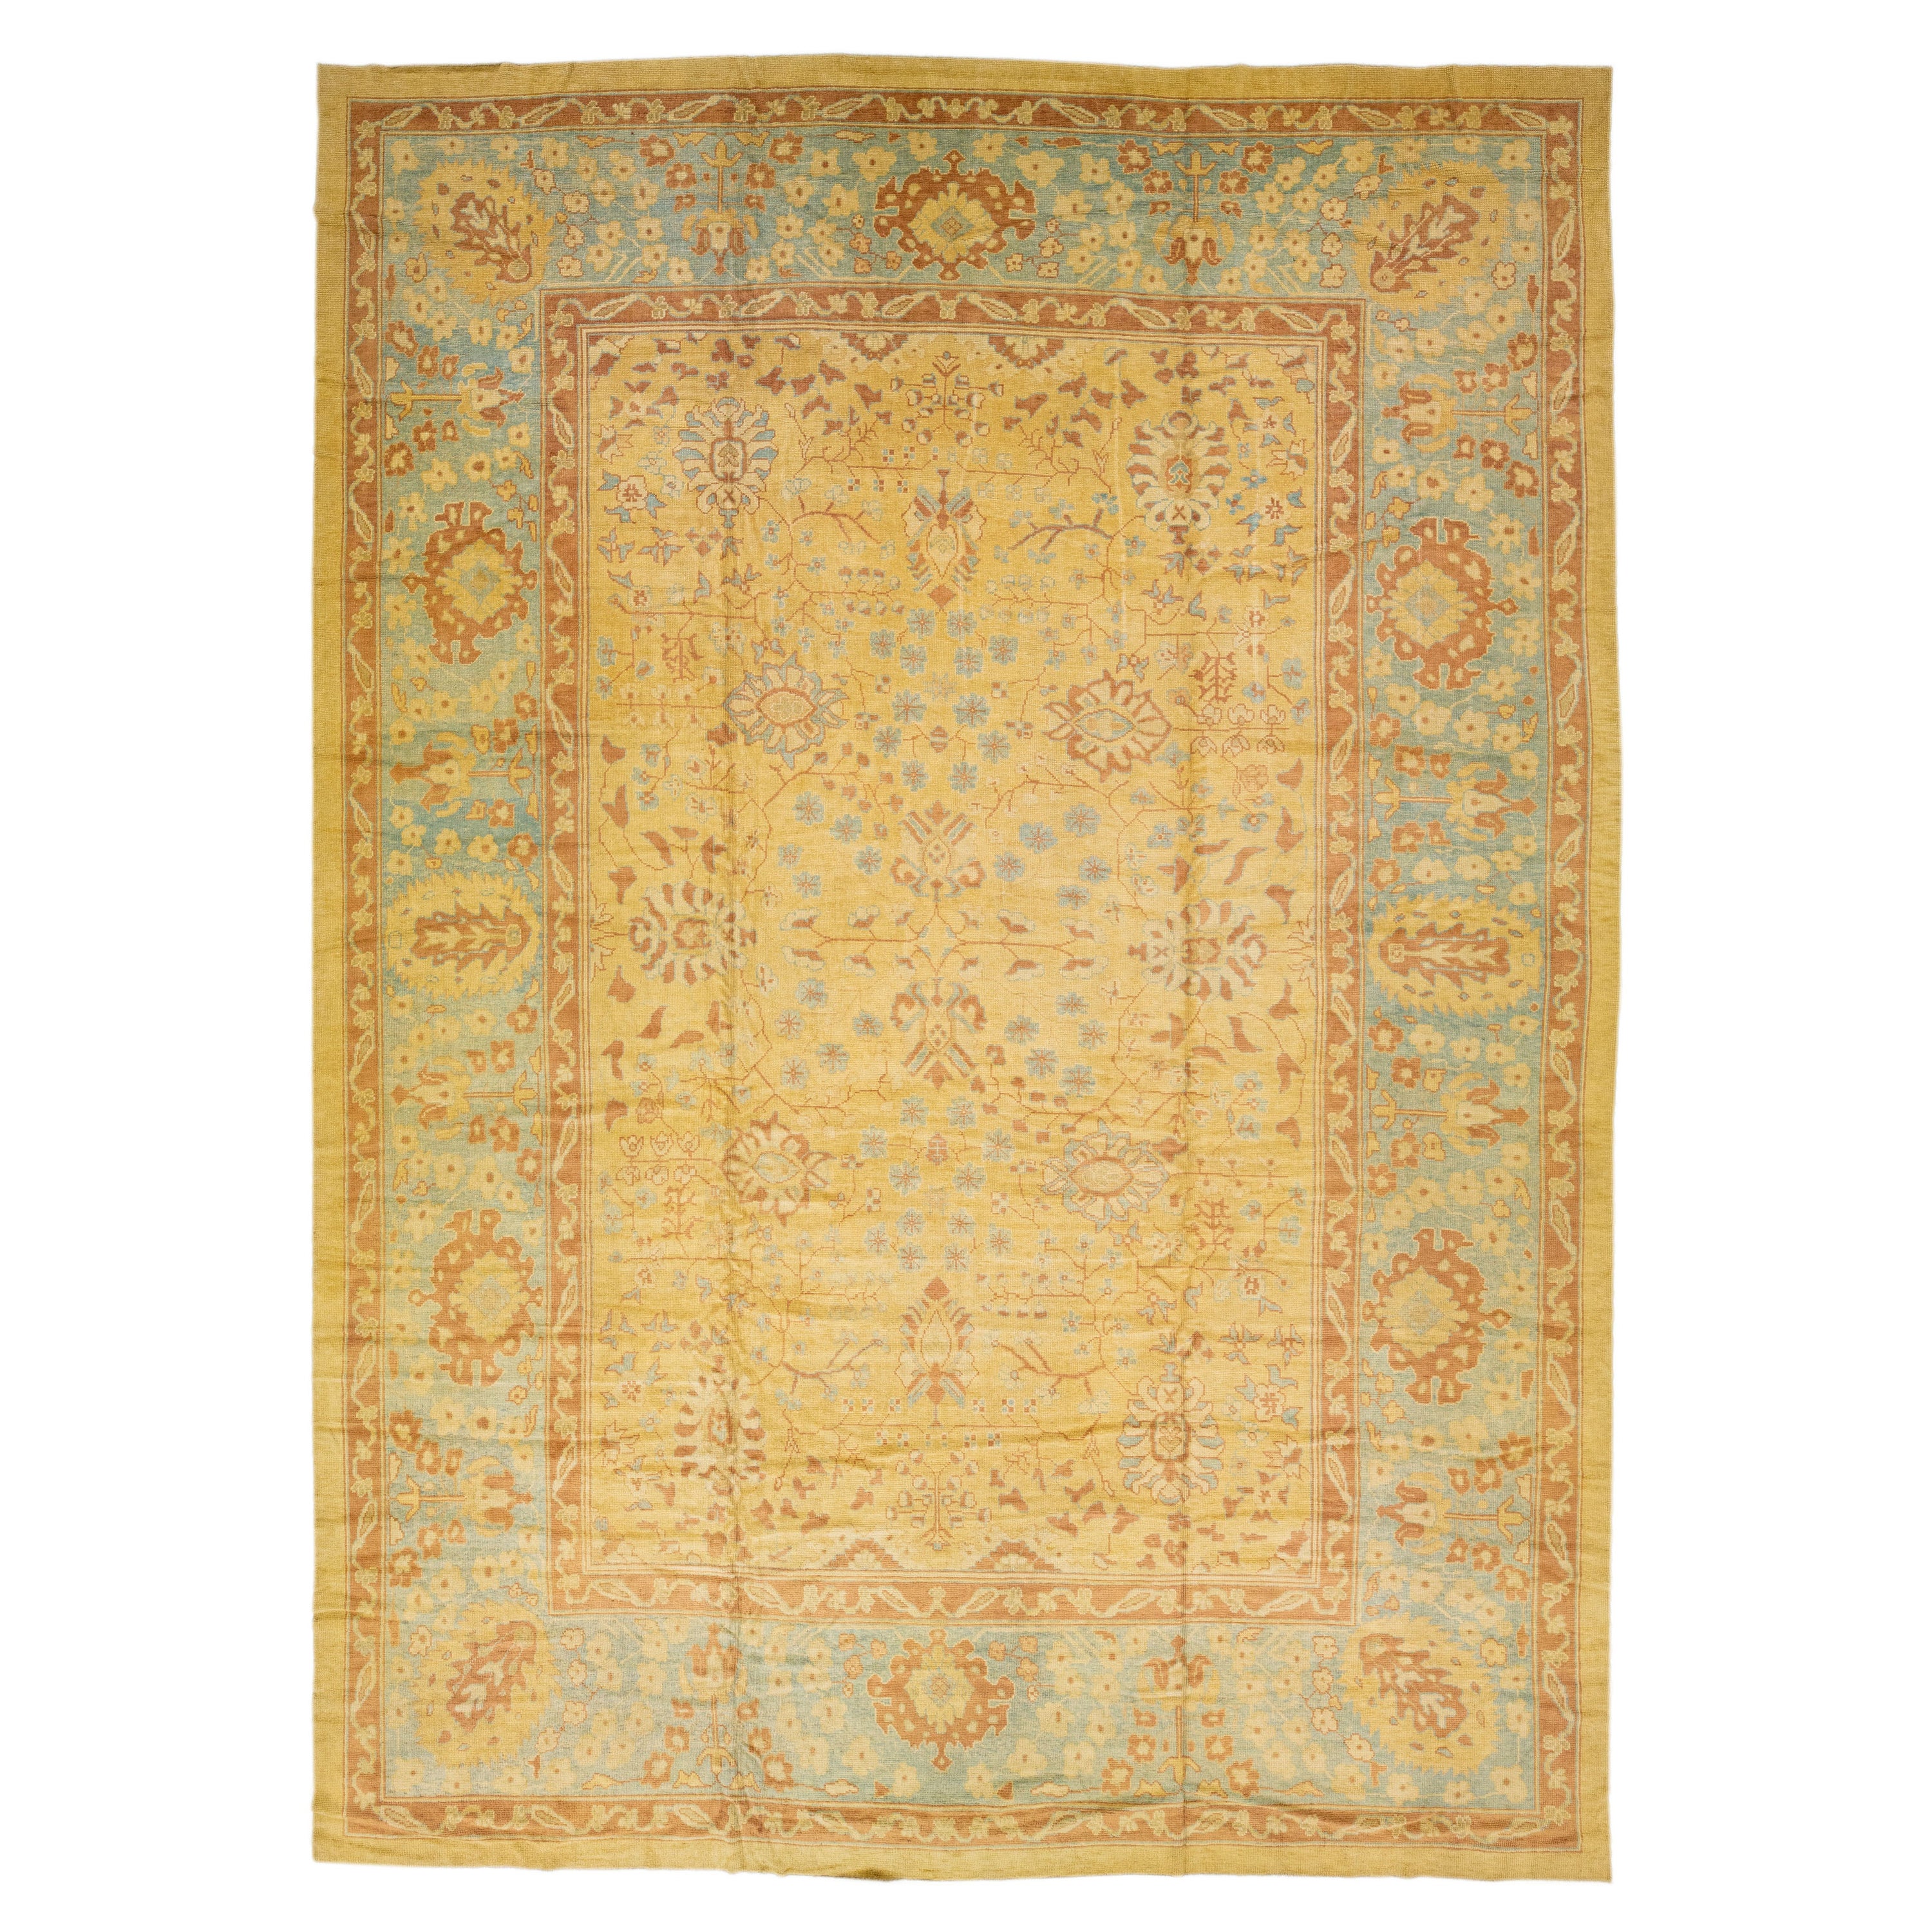 Modern Turkish Oushak Handmade Floral Wool Rug with Goldenrod Color Field